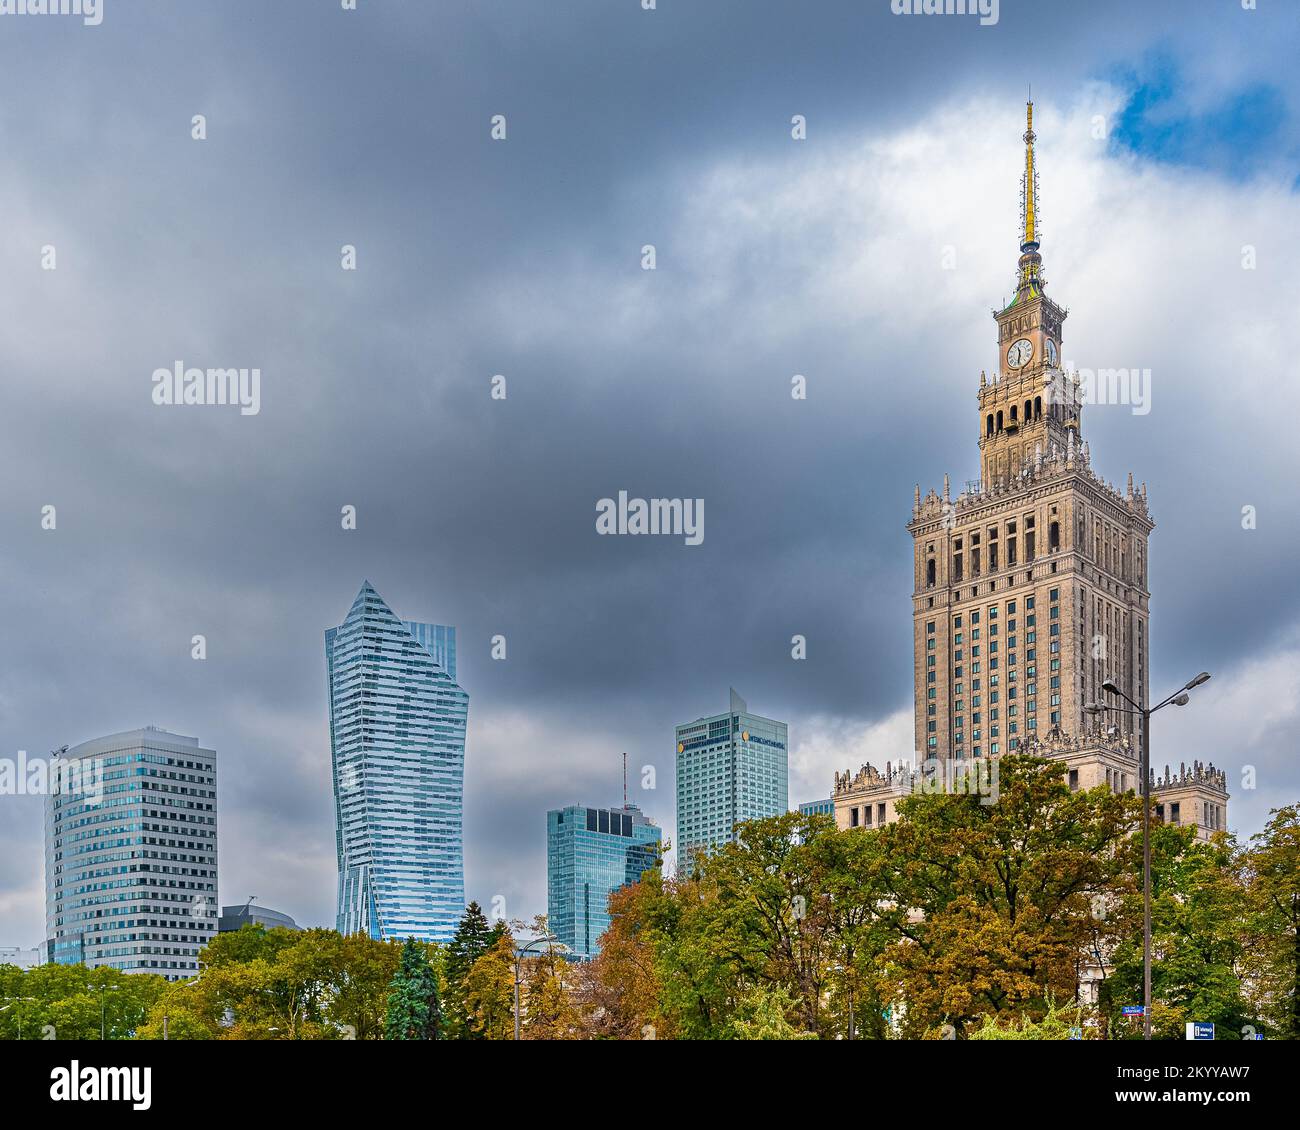 Warsaw. View of the Palace of Culture and Science, the center of Warsaw. In the background, the tall buildings of downtown Warsaw. Stock Photo